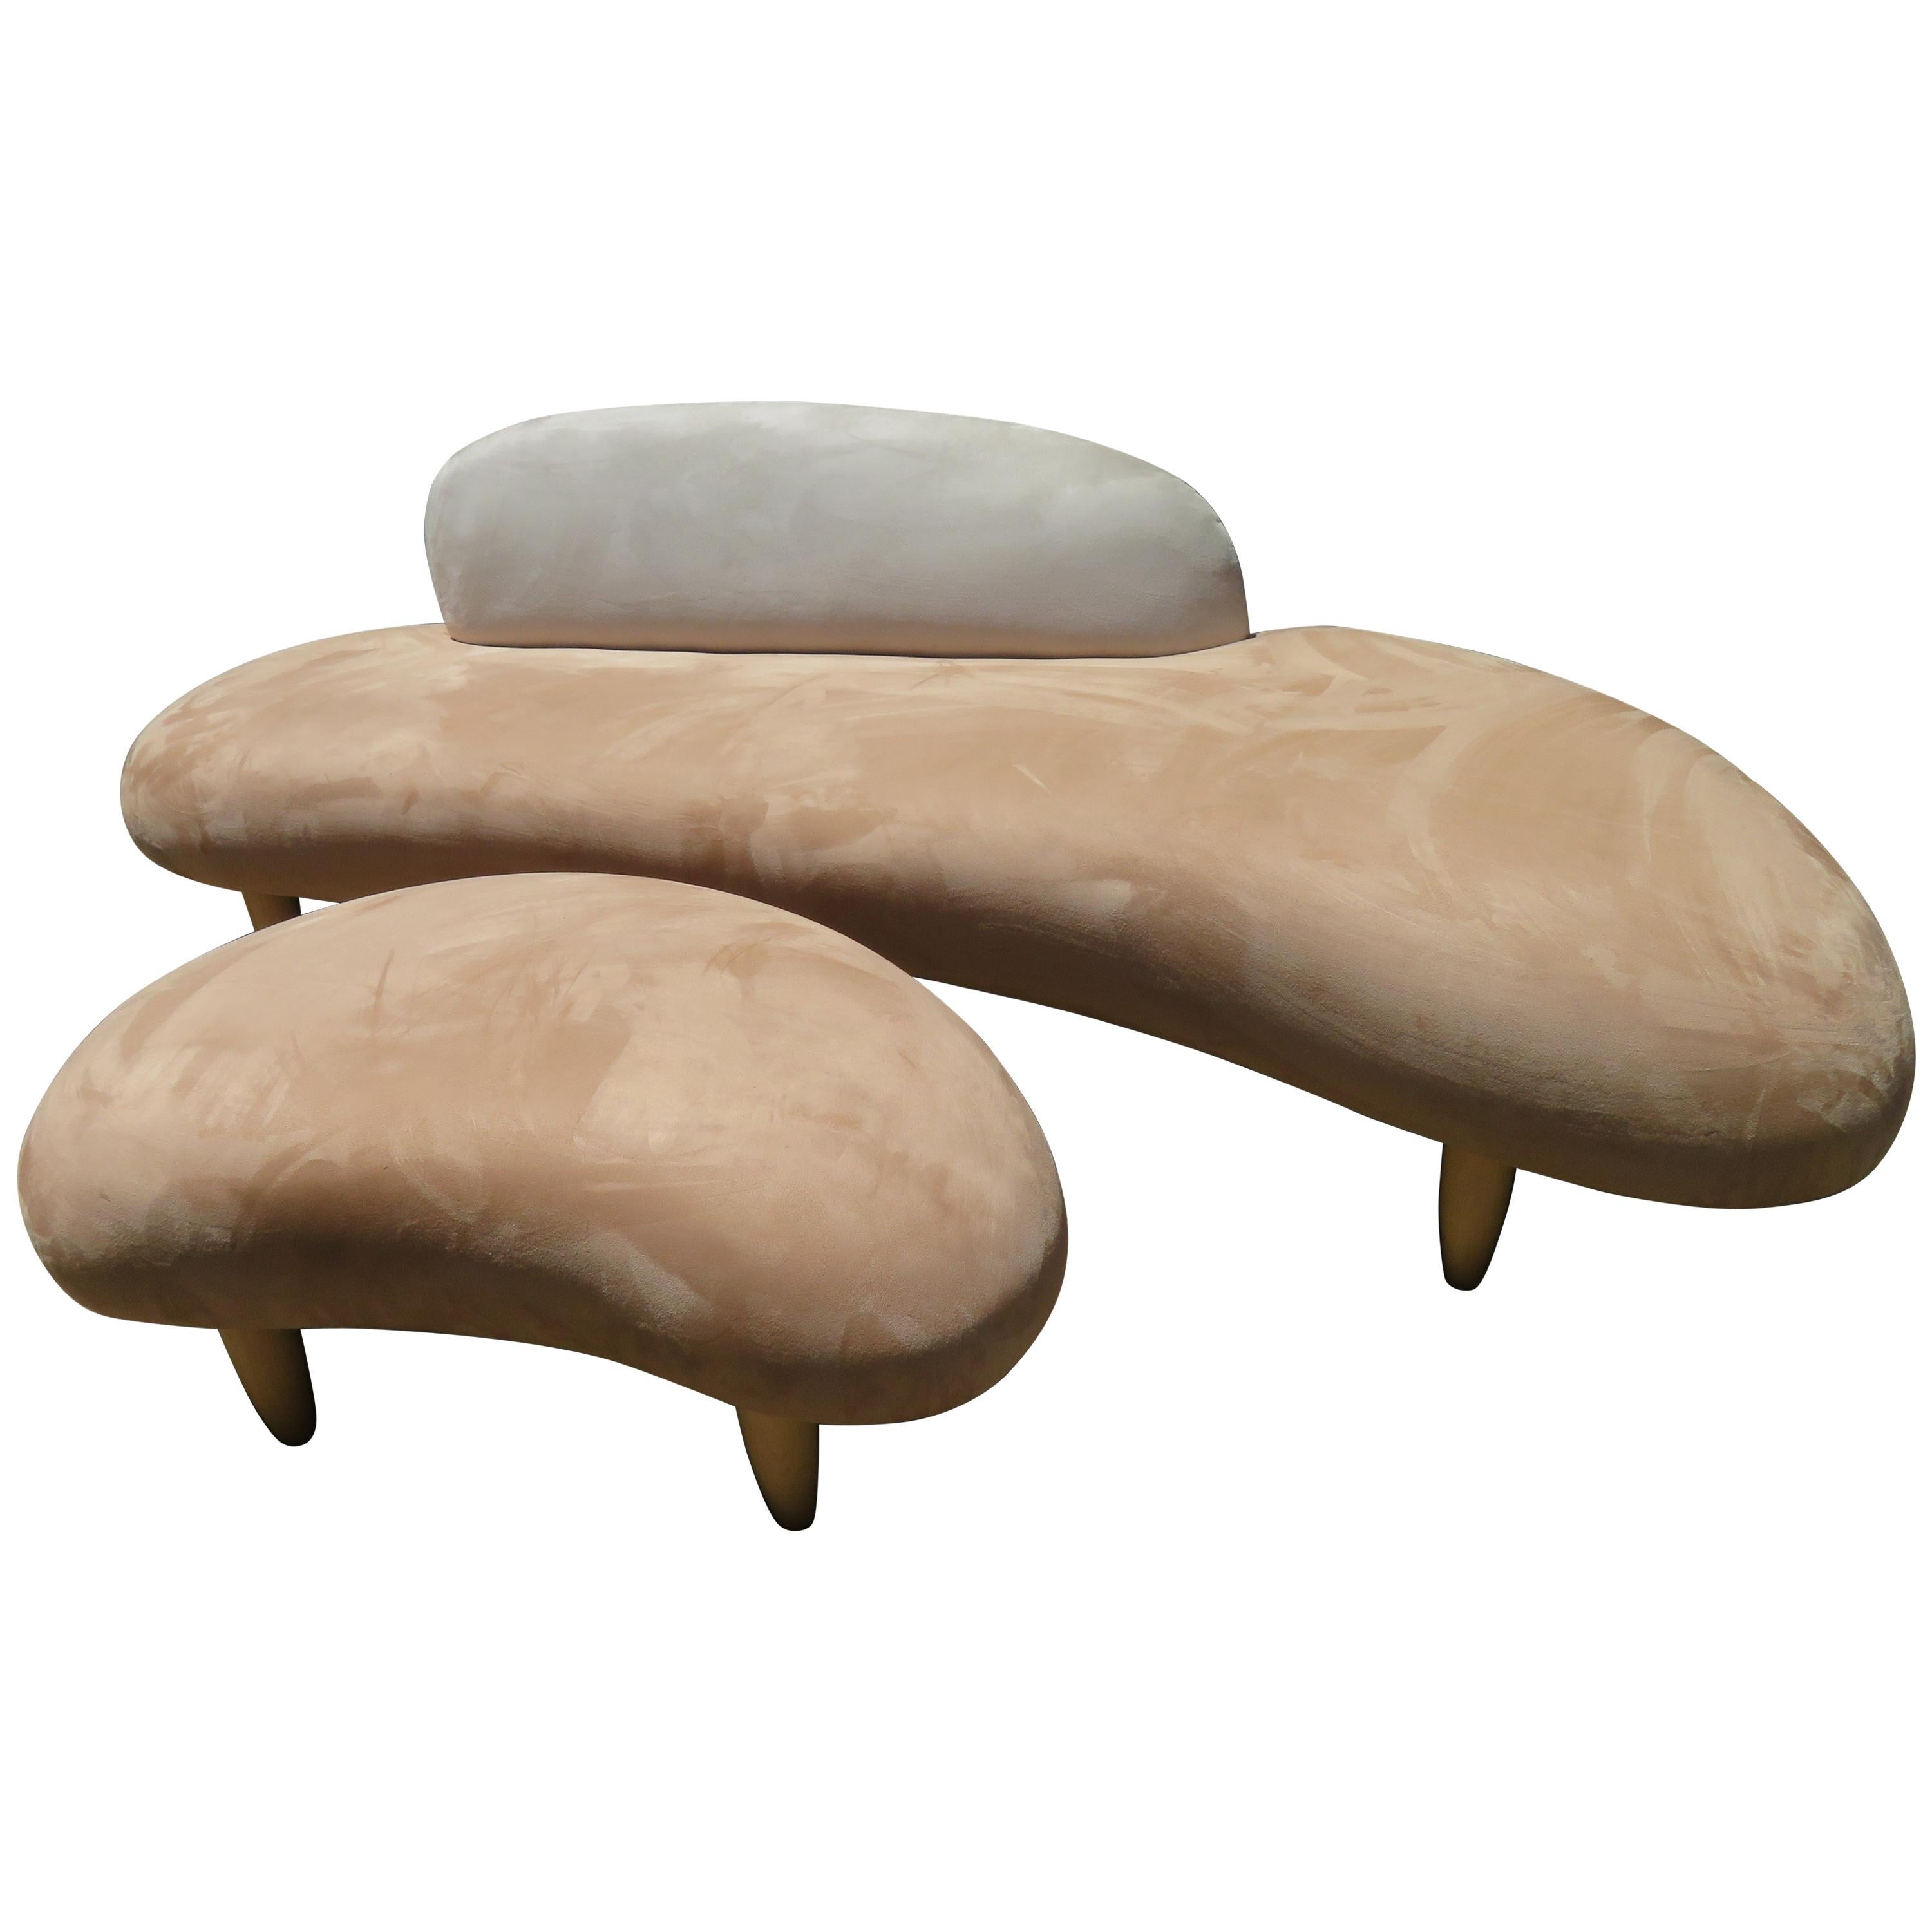 Gorgeous Noguchi Style Sculptural Free-Form Cloud Sofa and Ottoman